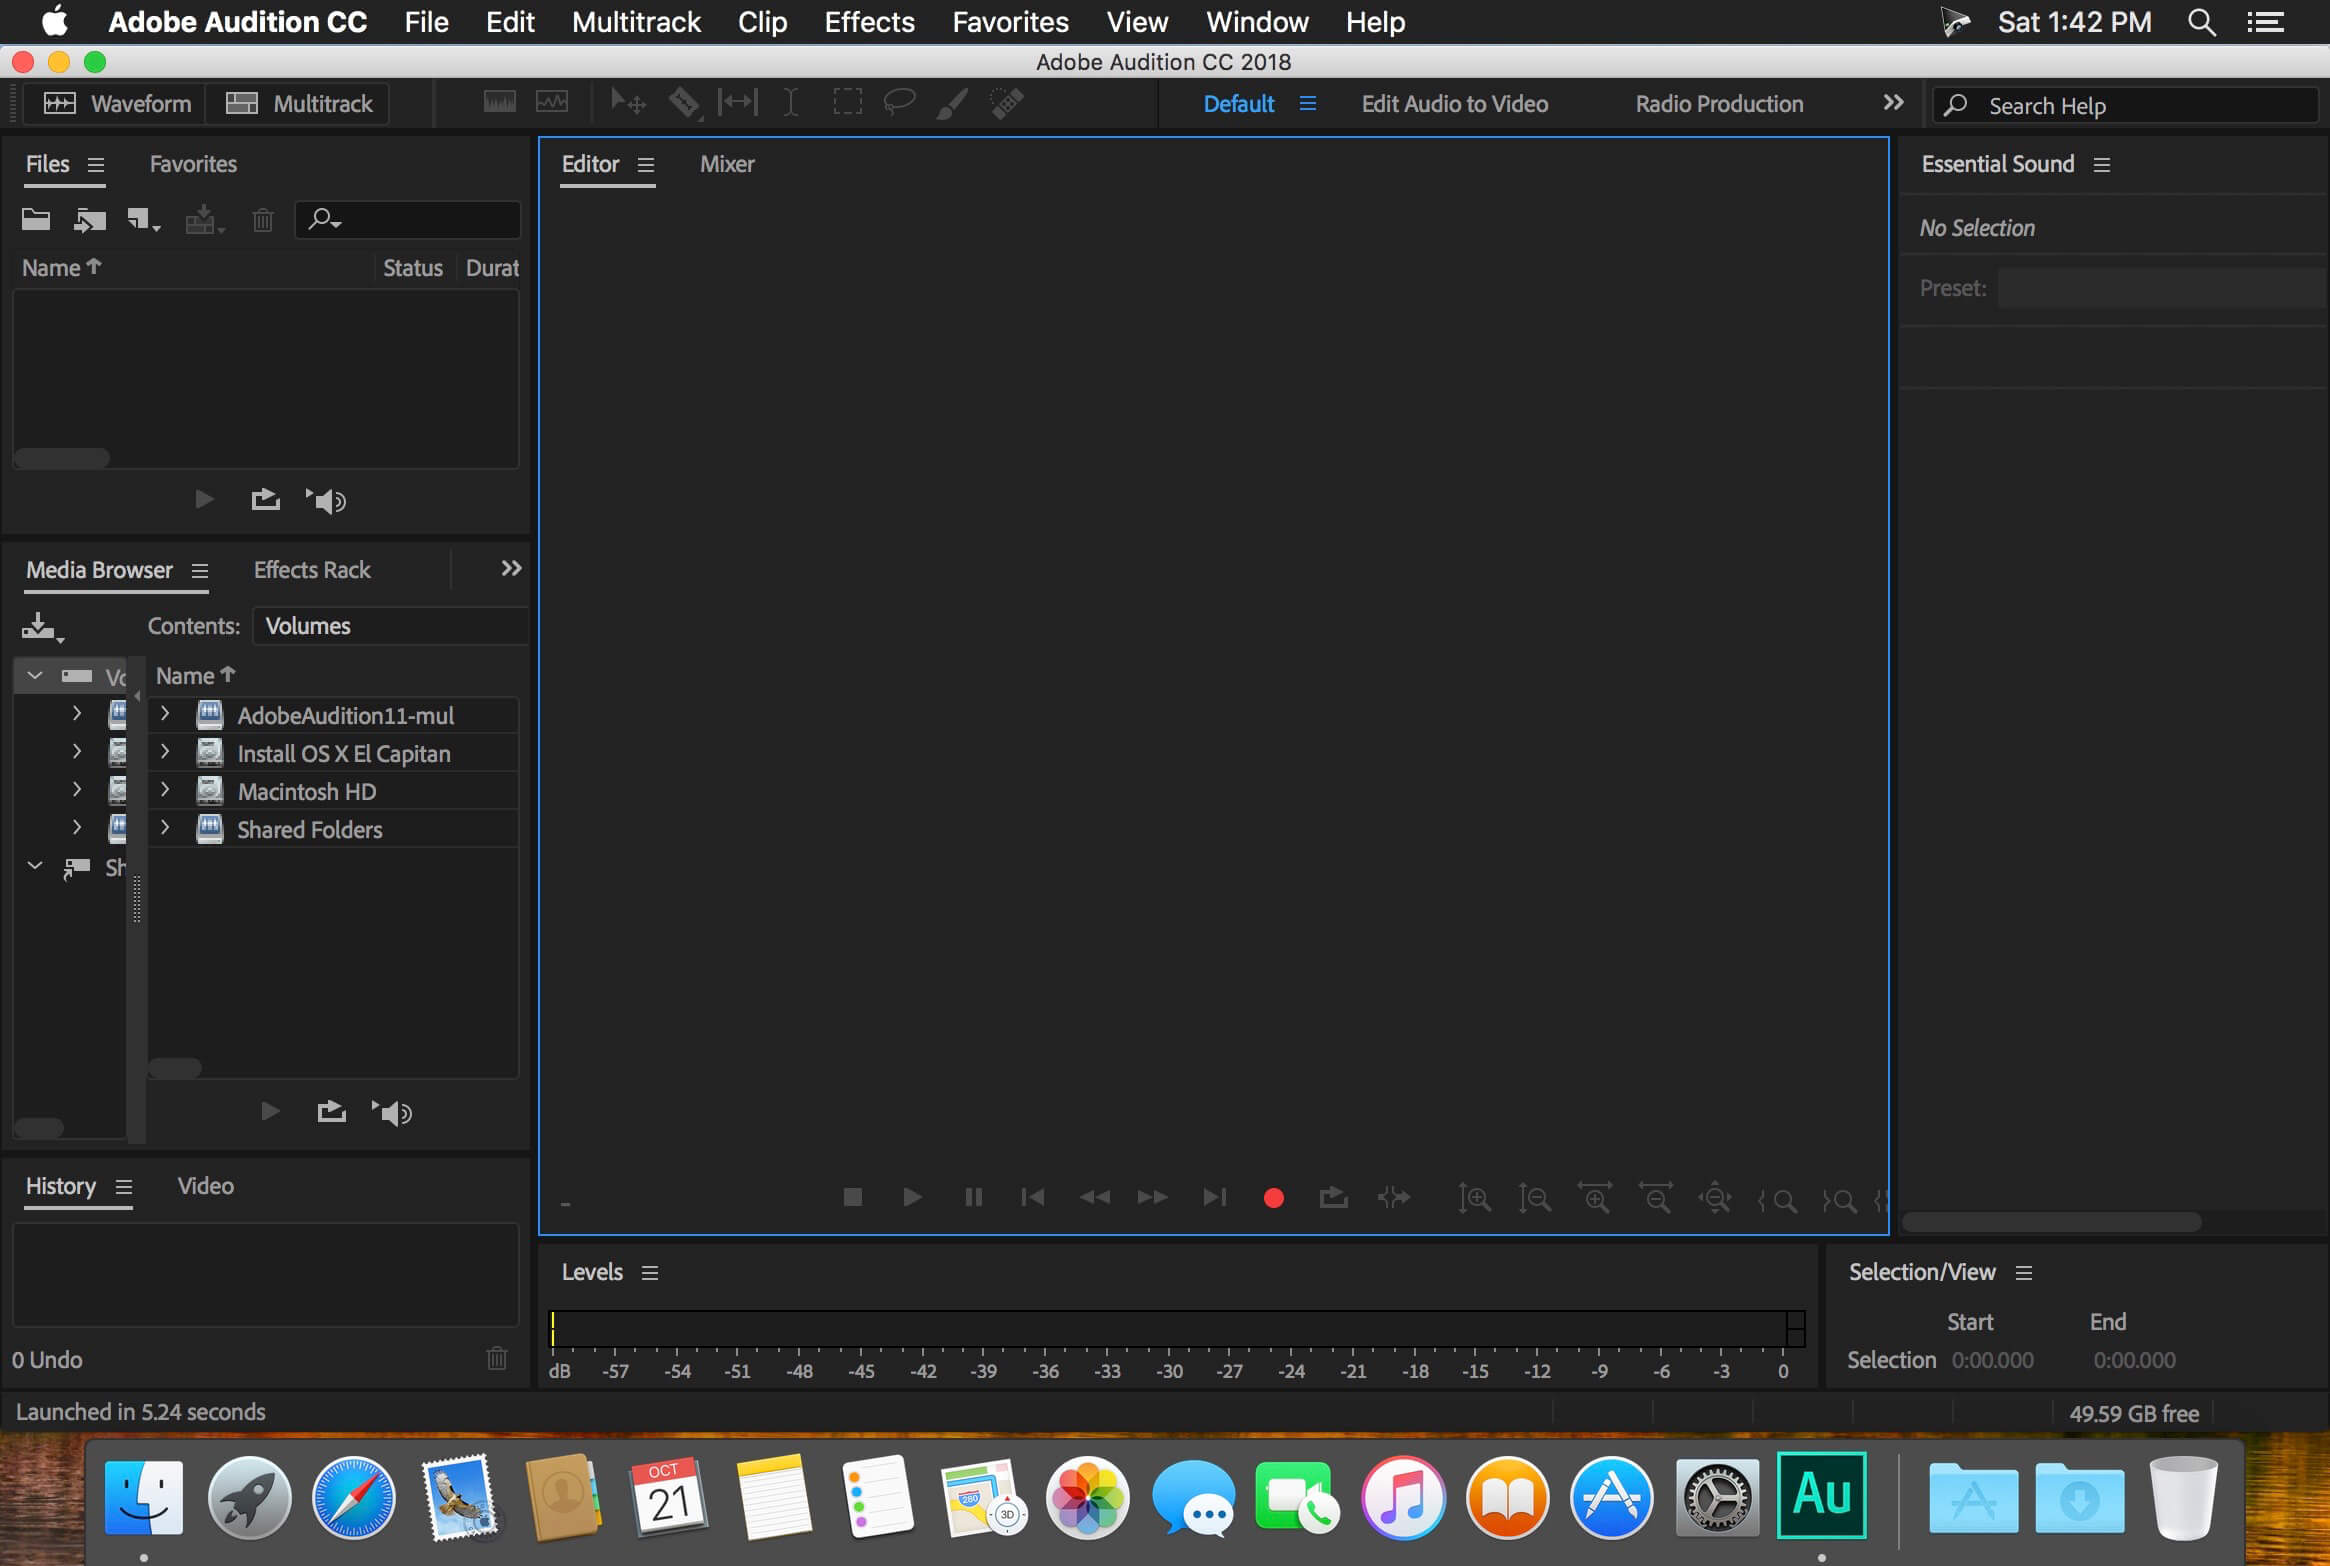 control surface for adobe audition